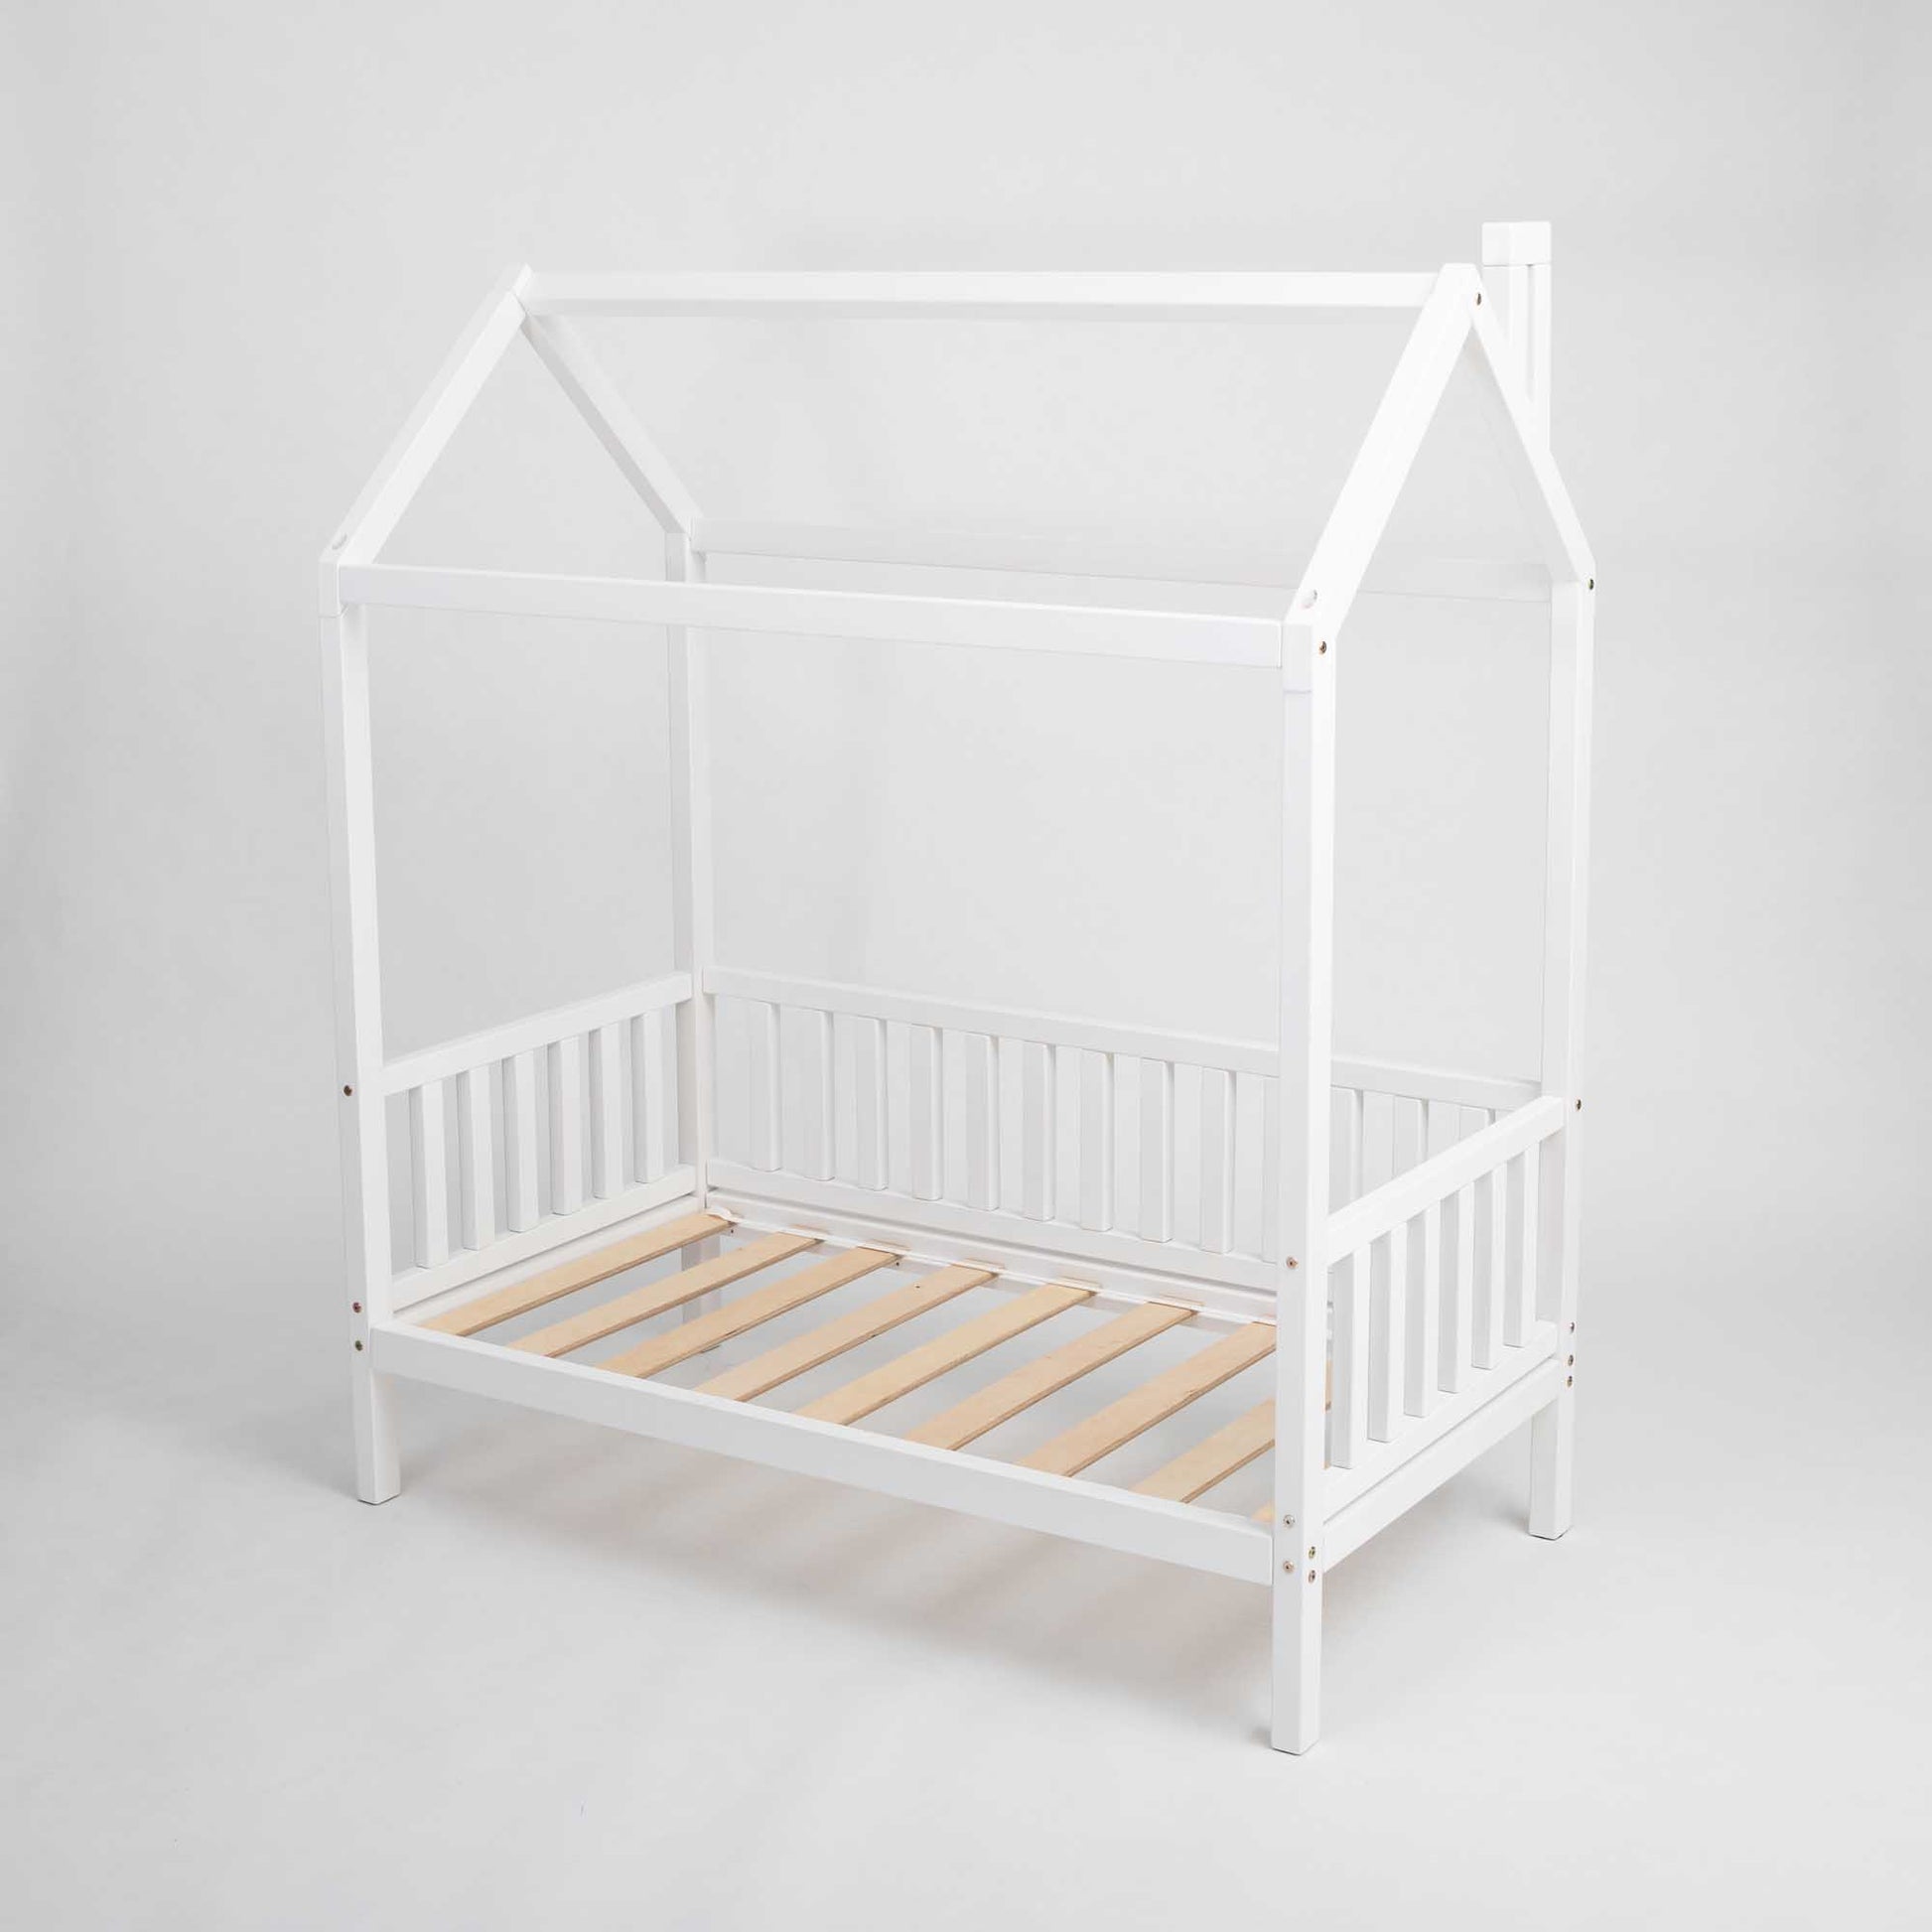 A raised white raised house bed on legs with 3-sided rails.